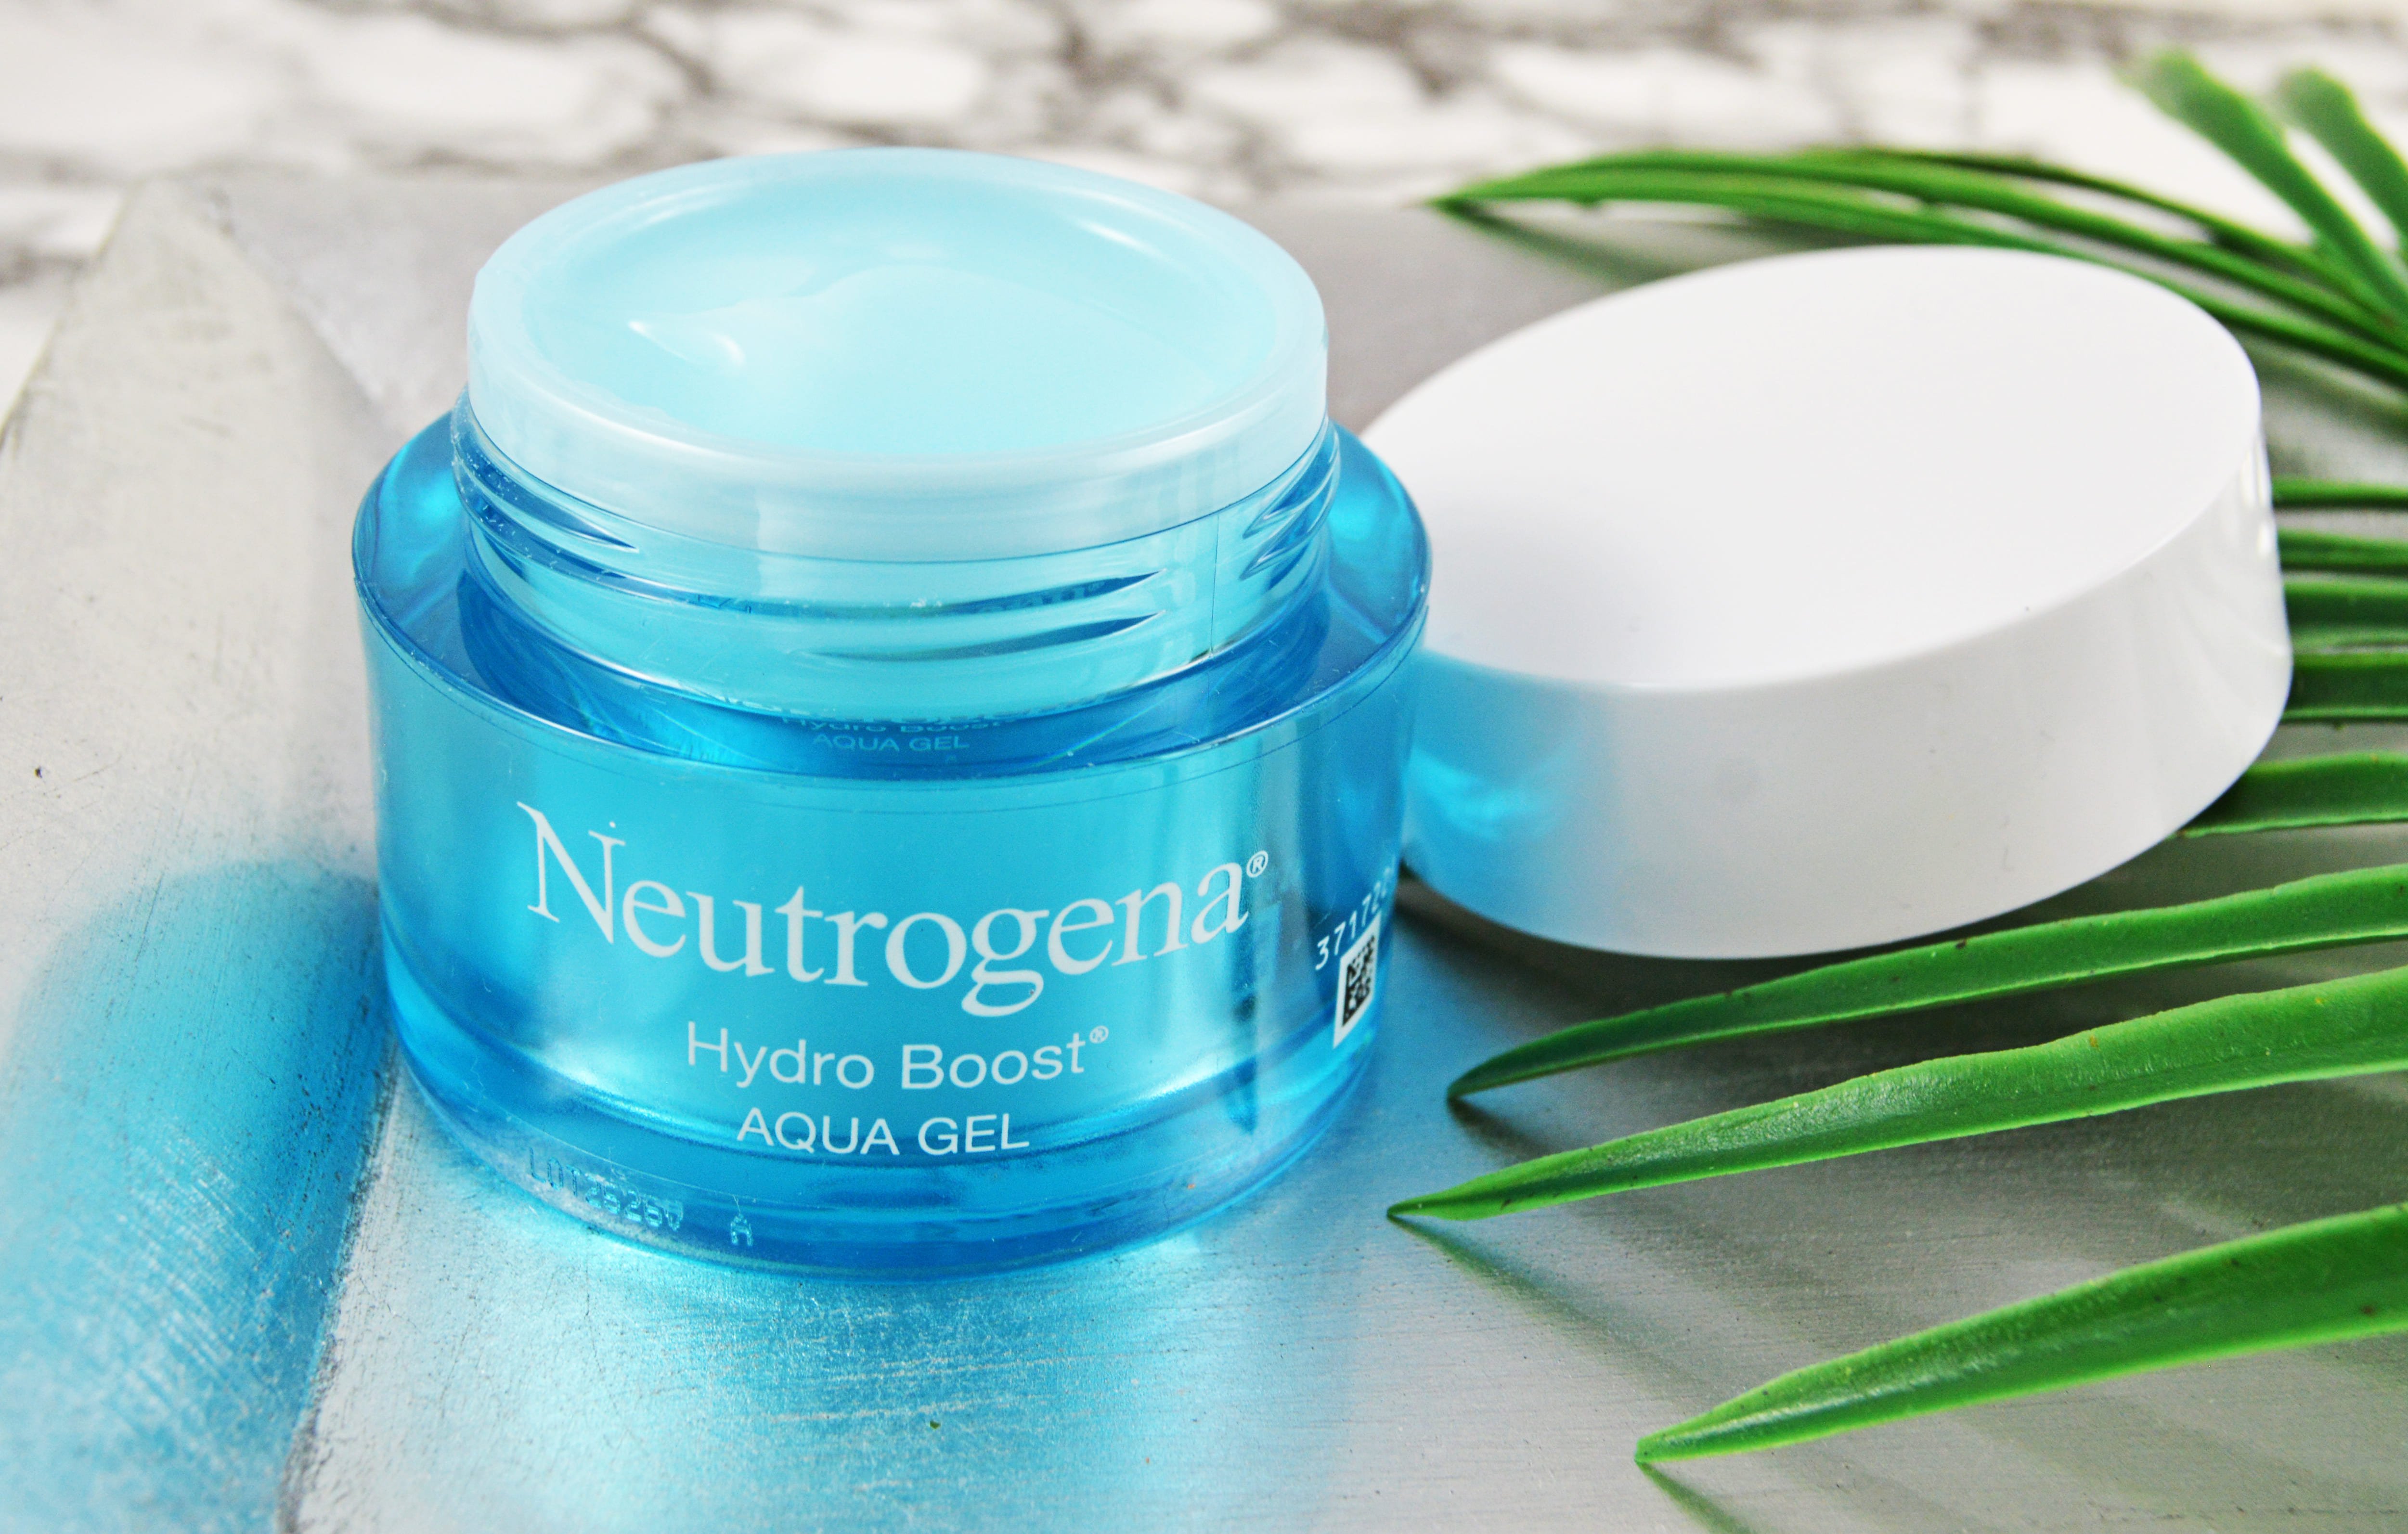 Review: Neutrogena Hydro Boost care products | Chic Advocate